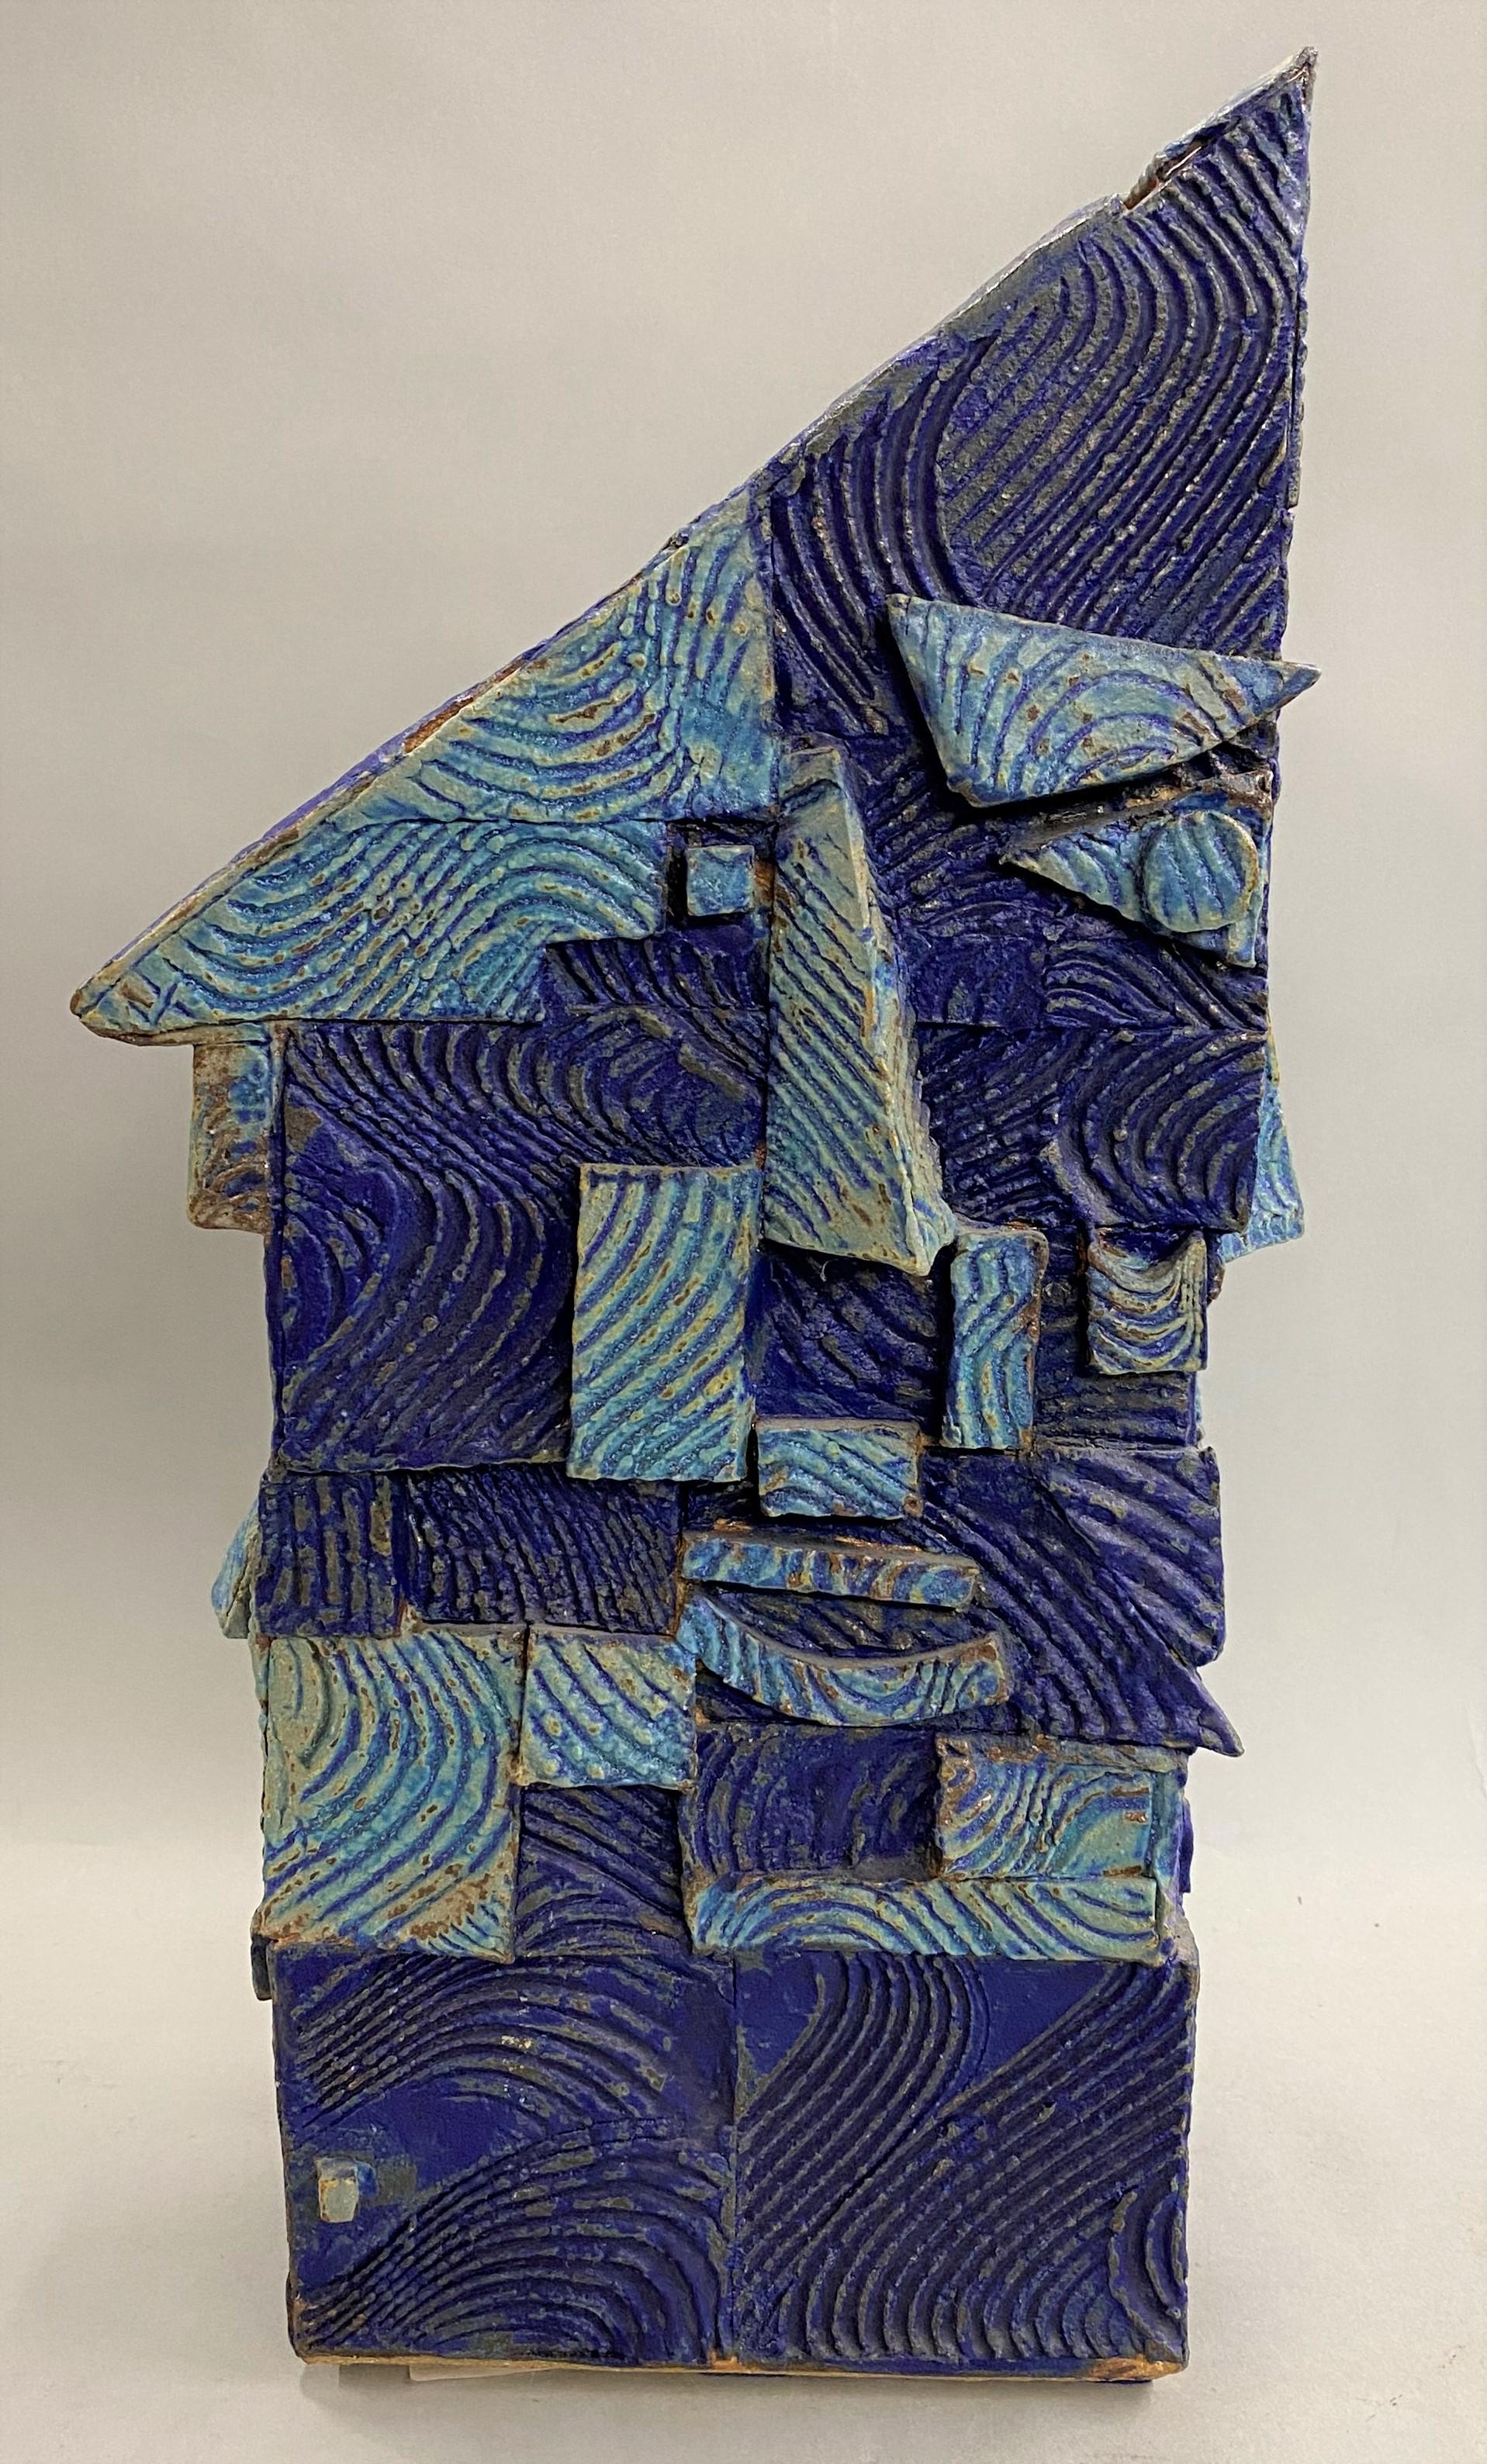 A wonderful example of an abstract ceramic or sculpture in blue, referred to as a bird house or face vase, by Indian / American artist Gerry Williams (1926-2014). Williams was born in India from American parents, and eventually set up a studio and